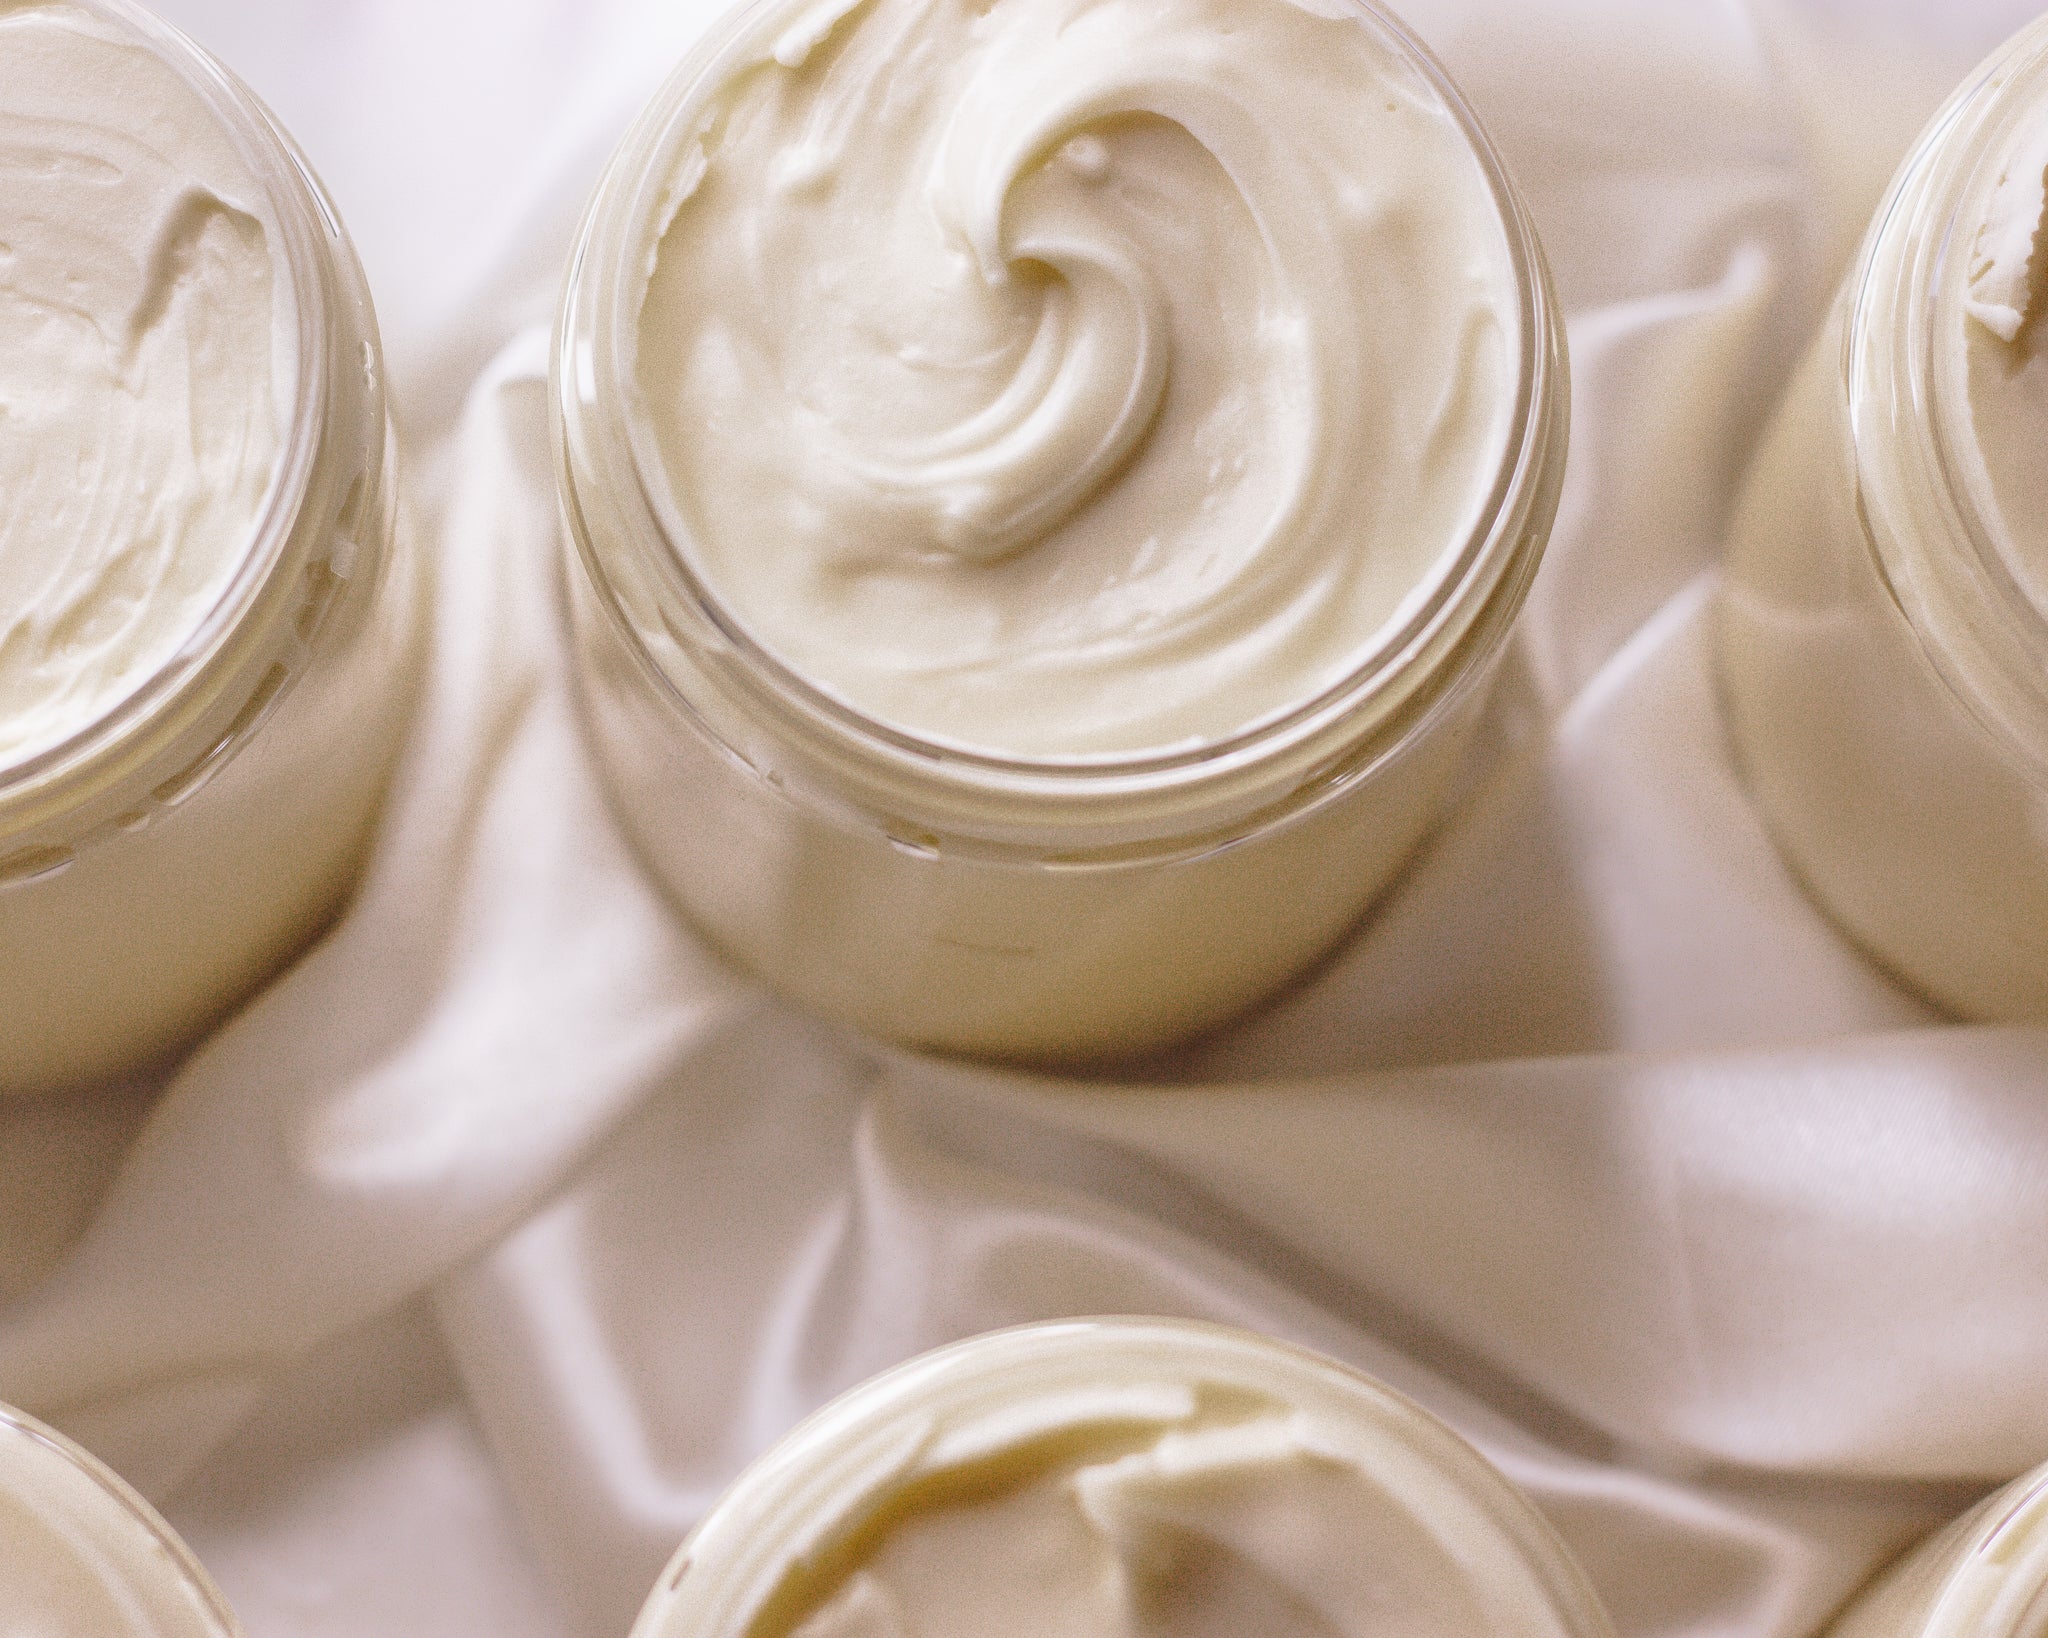 Whipped Body & Belly Butter